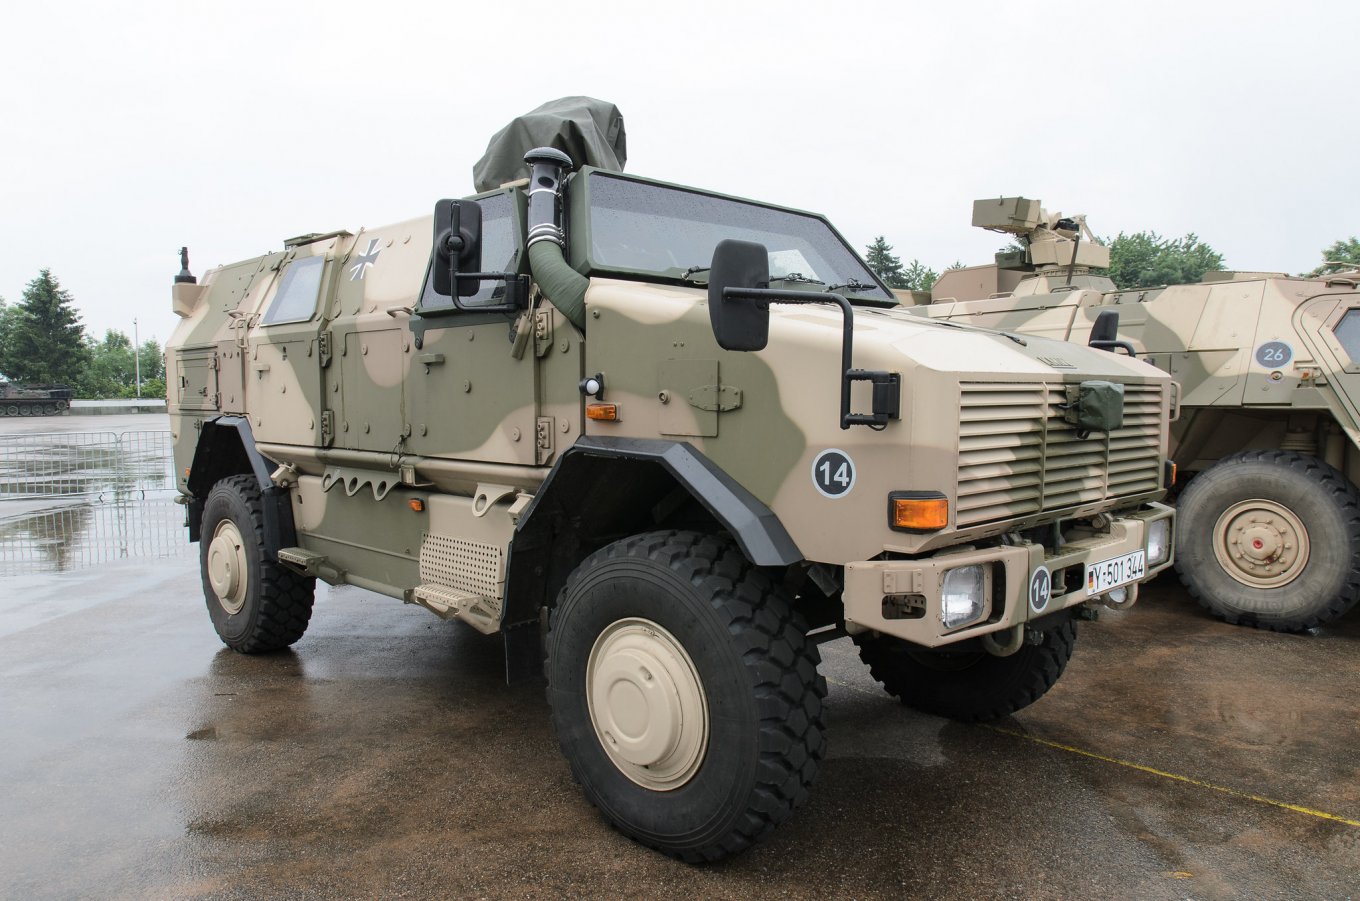 Dingo ATF armored vehicle of the German military. 2016 year. Germany. Photo: flickr.com